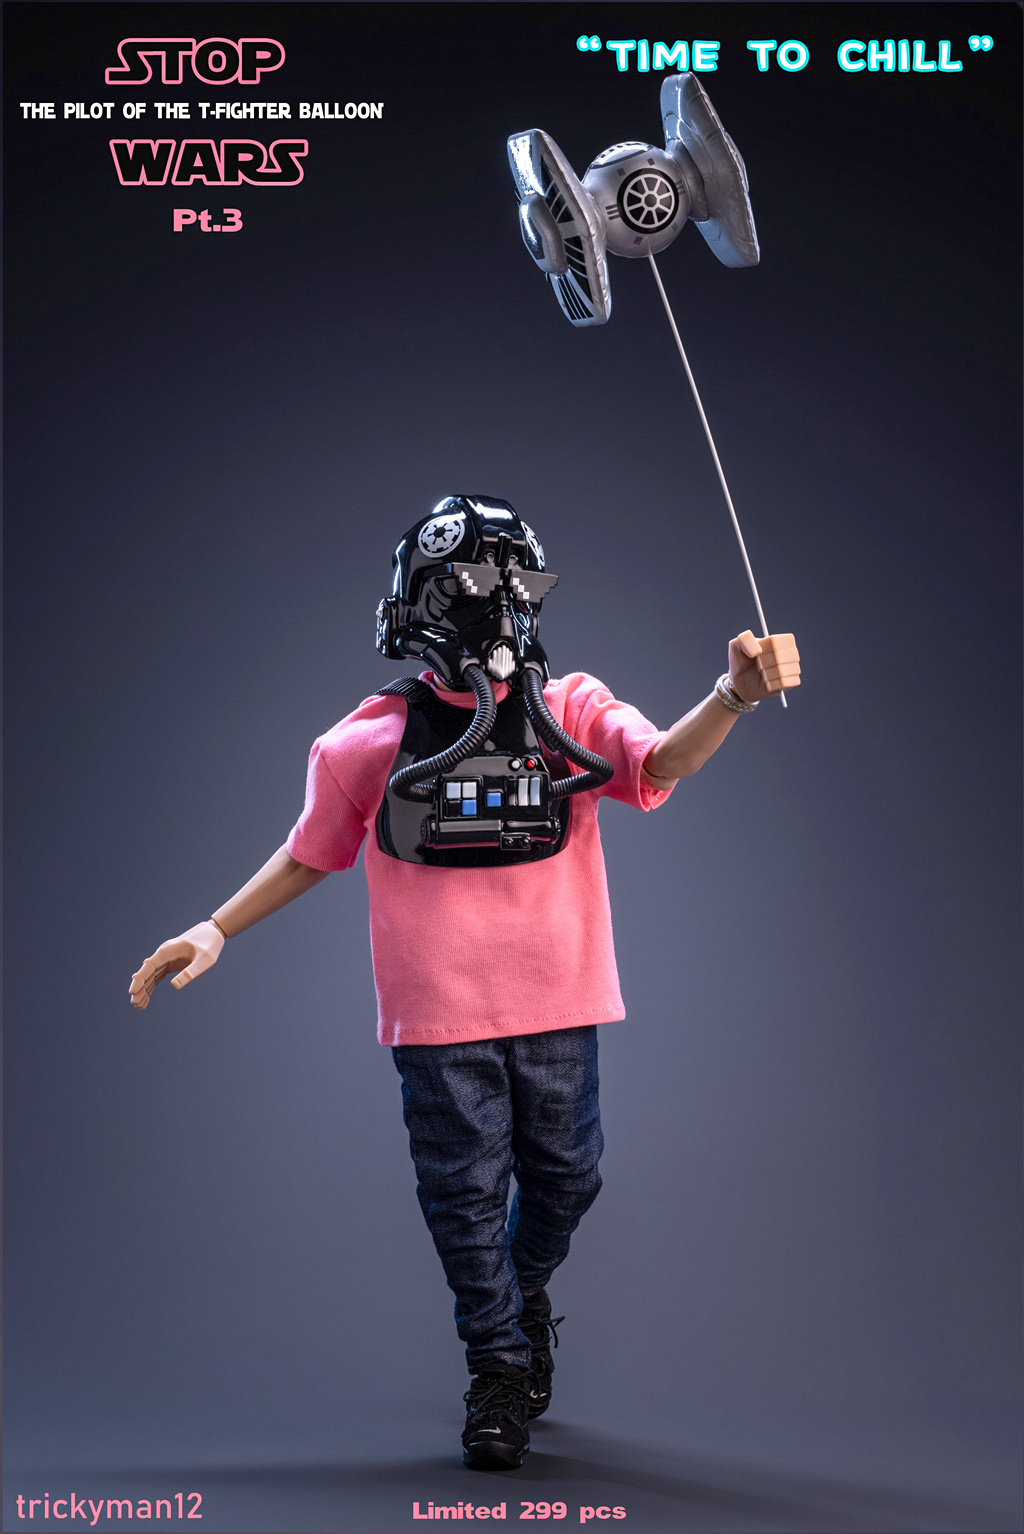 spoof - NEW PRODUCT: STOPWARS Pt.3: 1/6 scale THE PILOT OF THE T-FIGHTER BALLOON 16580212